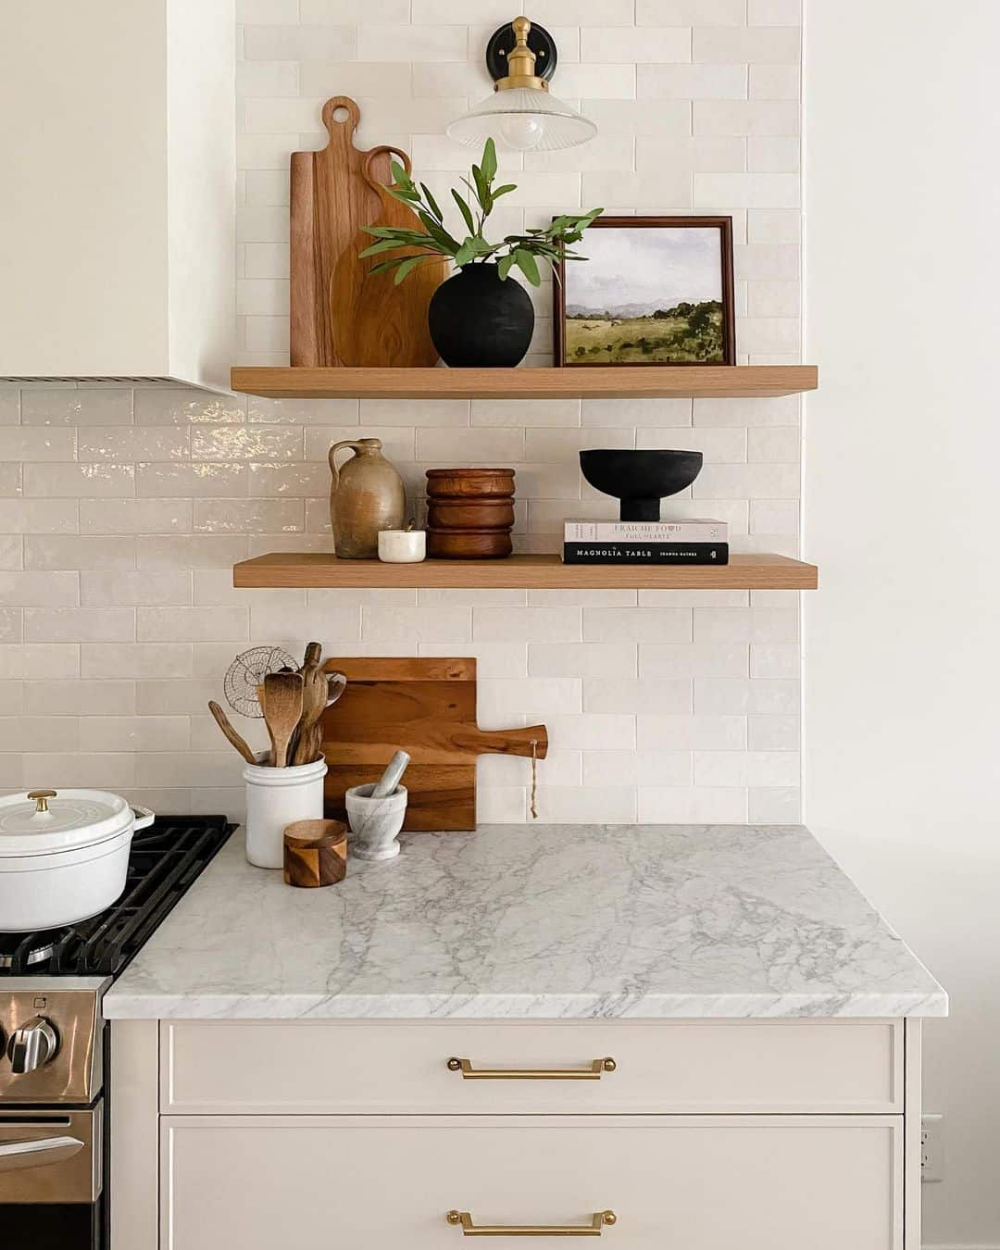 Maximize Your Kitchen Space with These
Creative Shelf Ideas